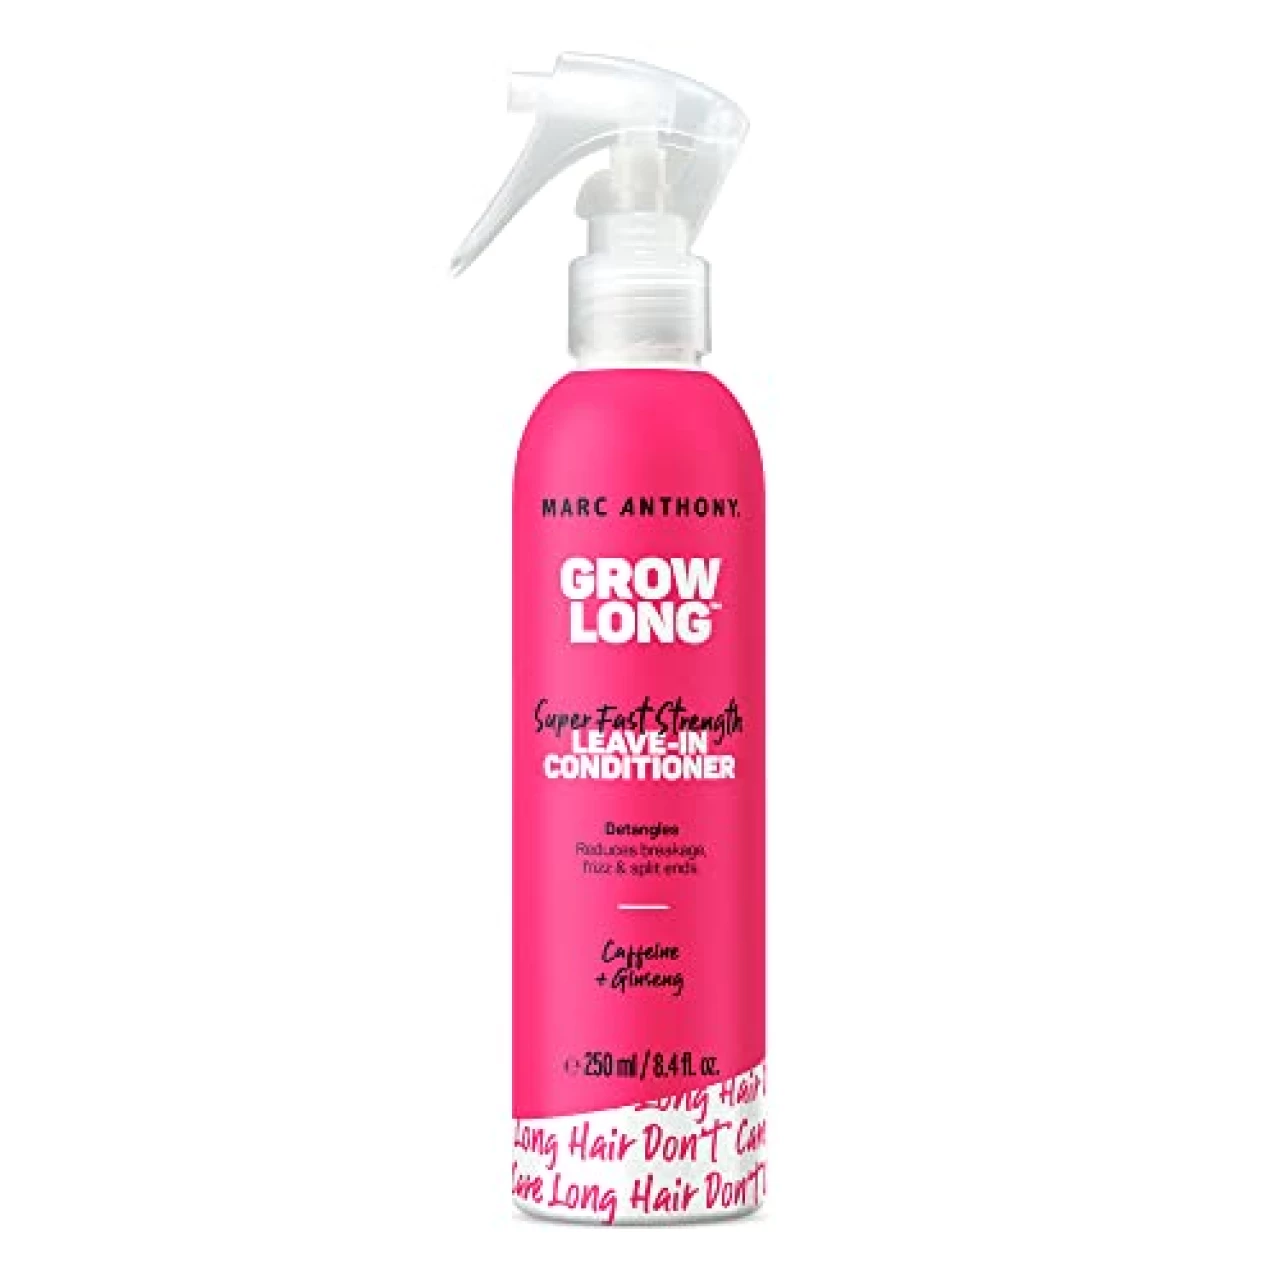 Marc Anthony Leave-In Conditioner Spray &amp; Detangler, Grow Long Biotin - Anti-Frizz Deep Conditioner For Split Ends &amp; Breakage - Vitamin E, Caffeine &amp; Ginseng for Curly, Dry &amp; Damaged Hair